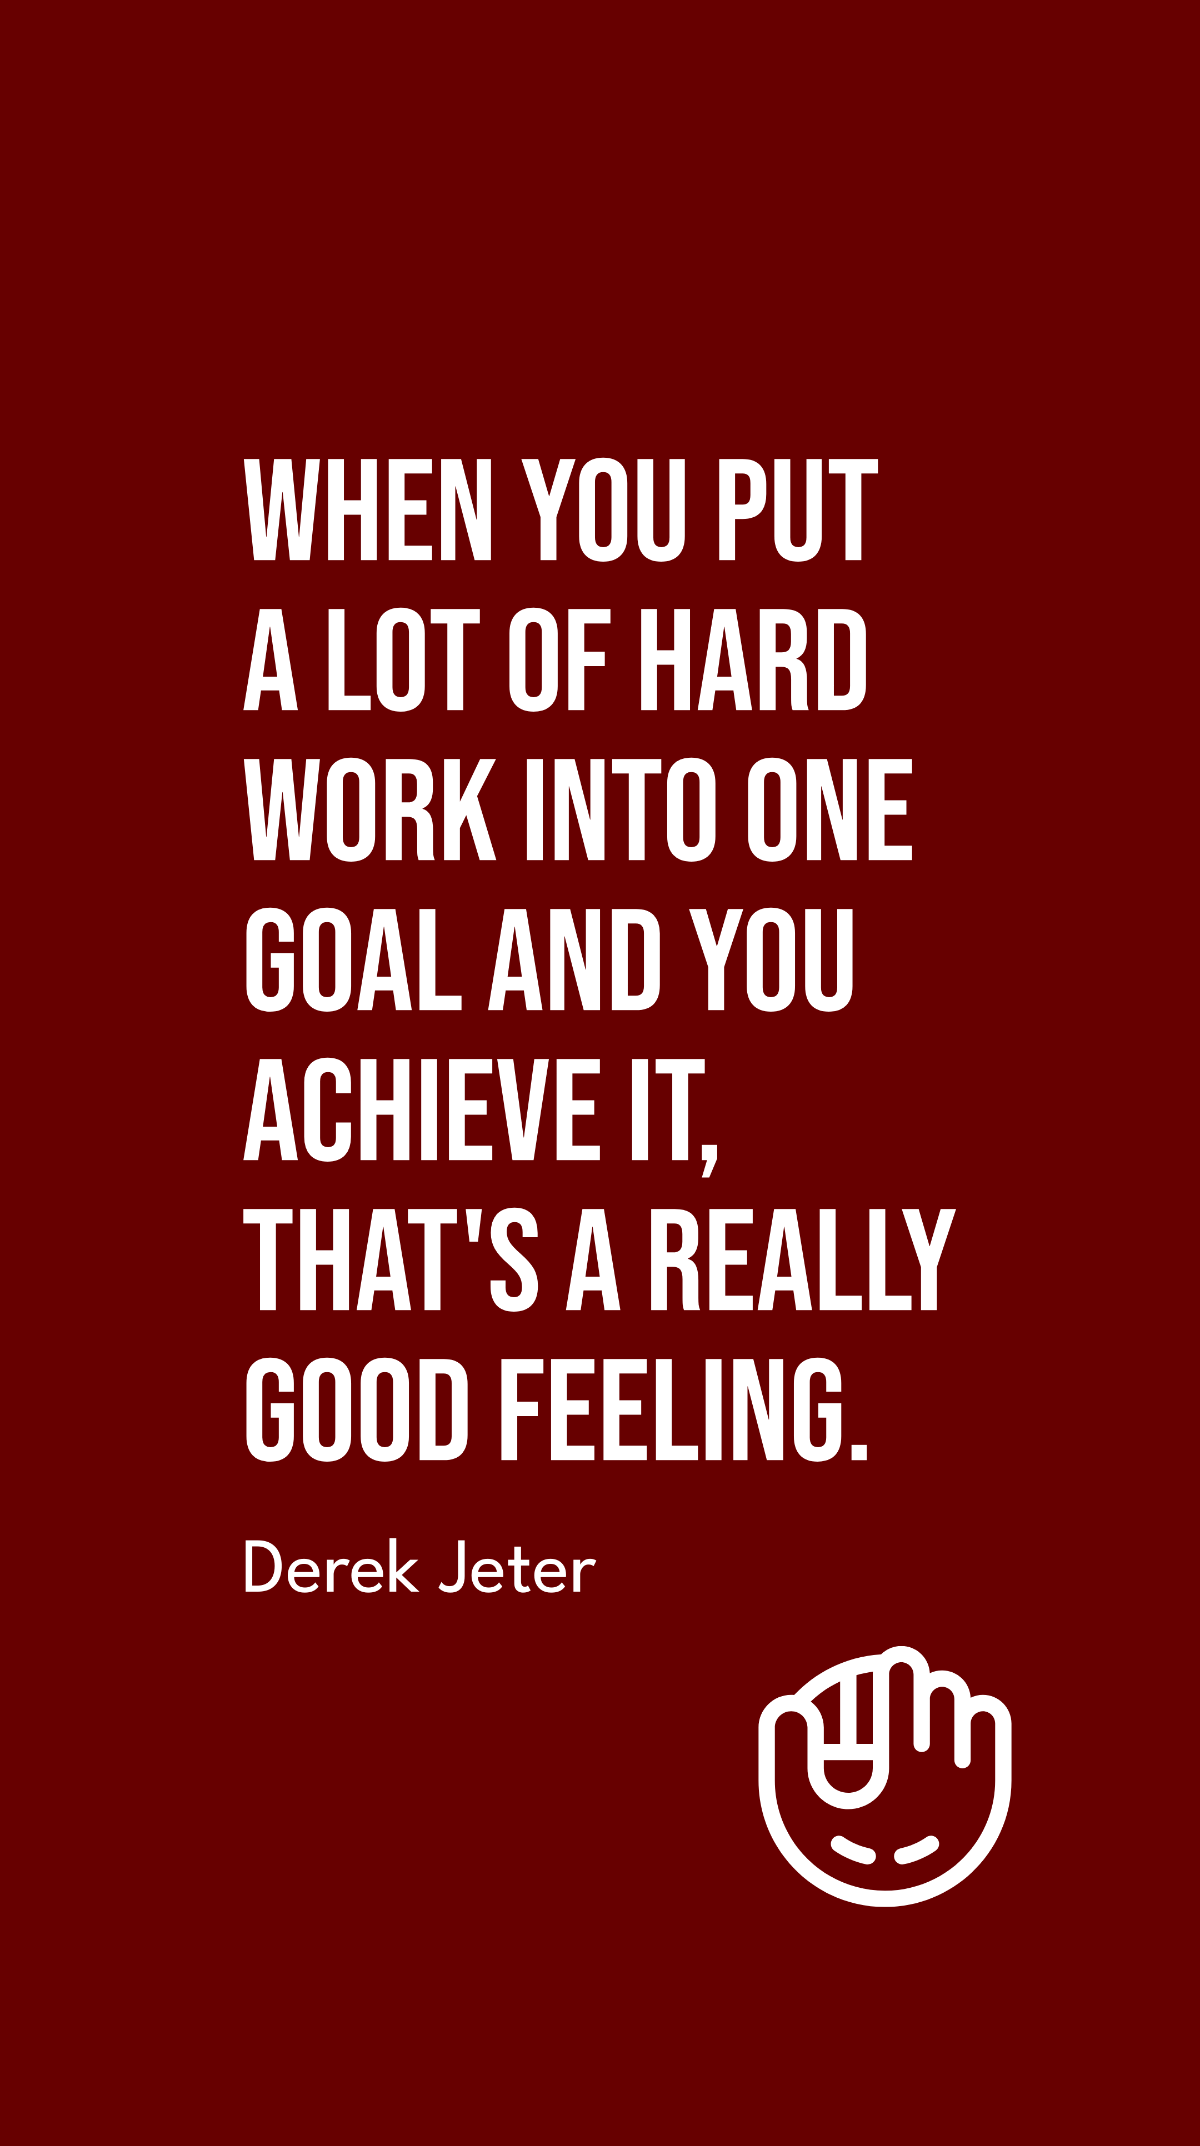 Derek Jeter - When you put a lot of hard work into one goal and you achieve it, that's a really good feeling.  Template